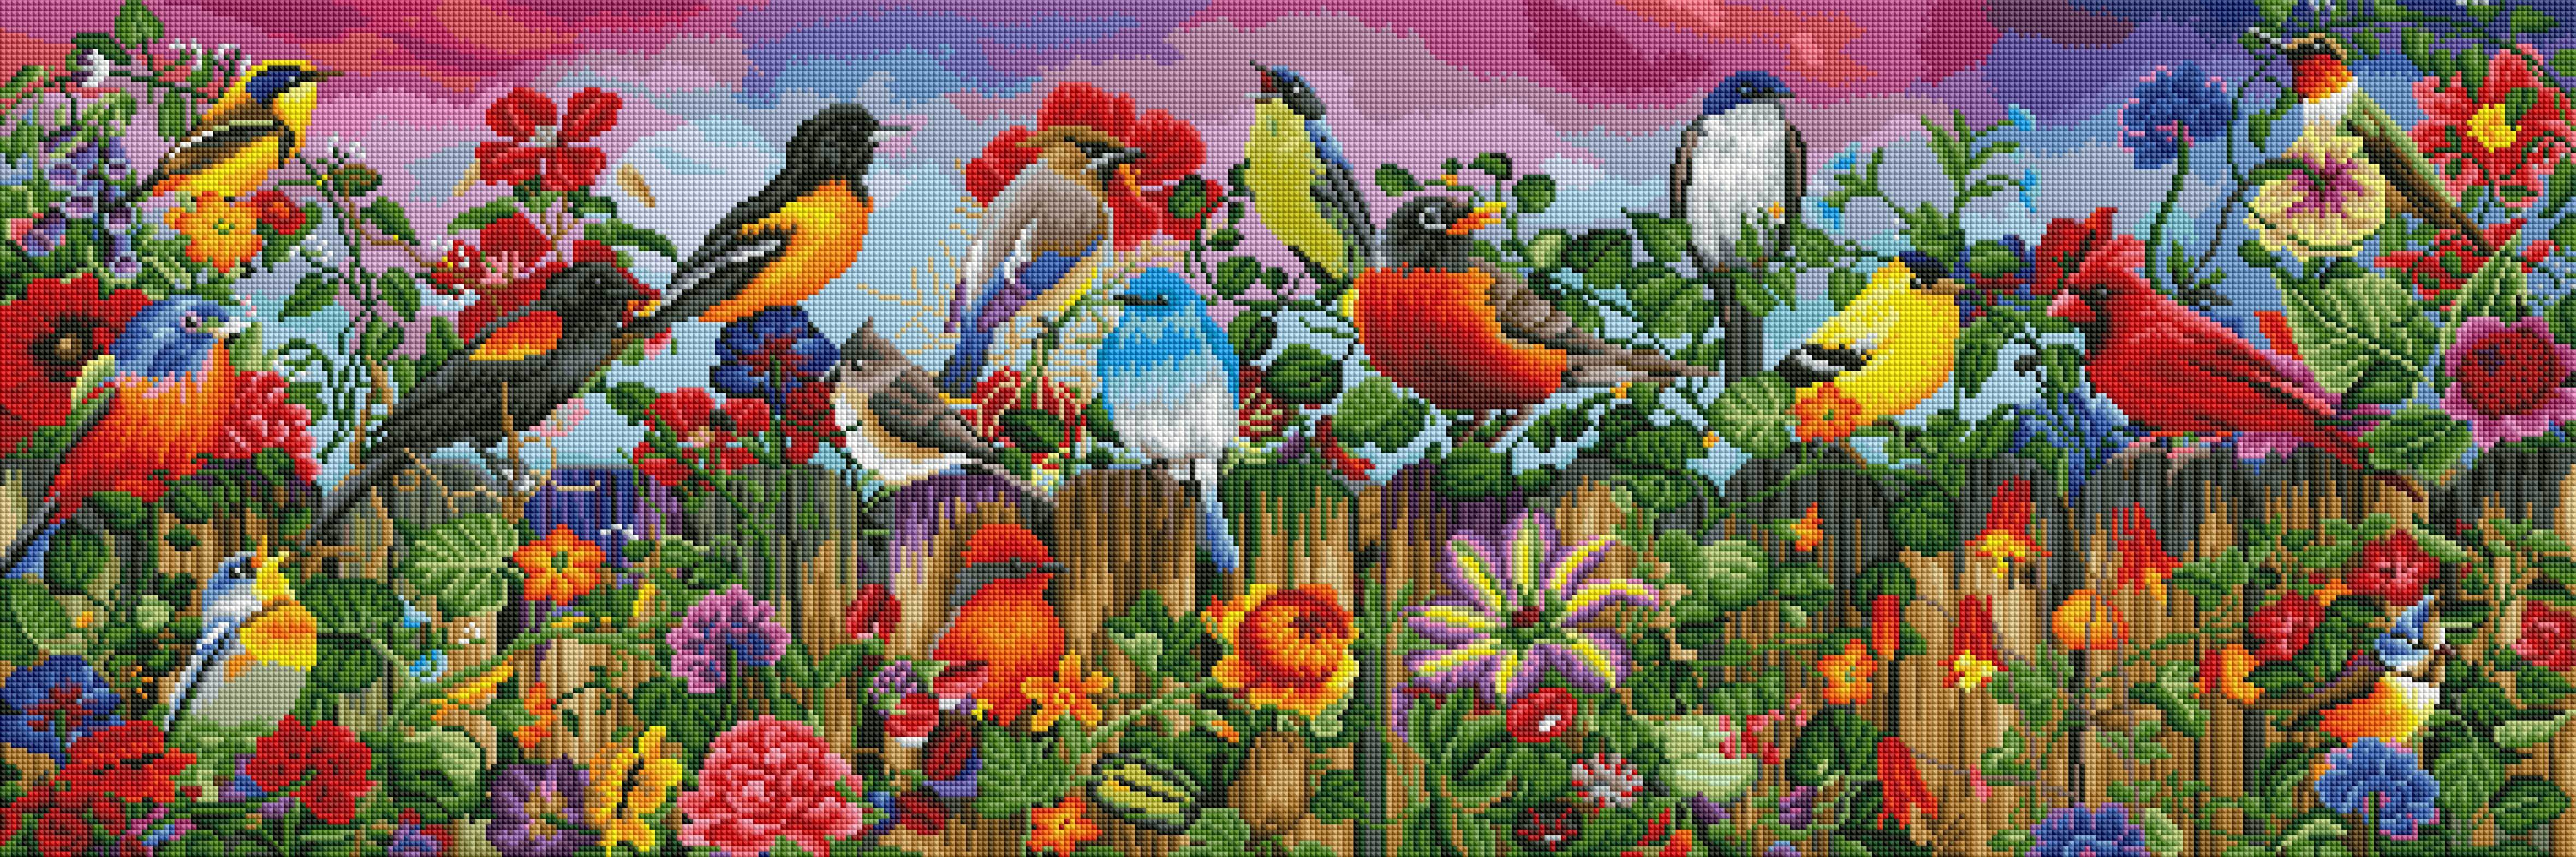 Birds and Blooms